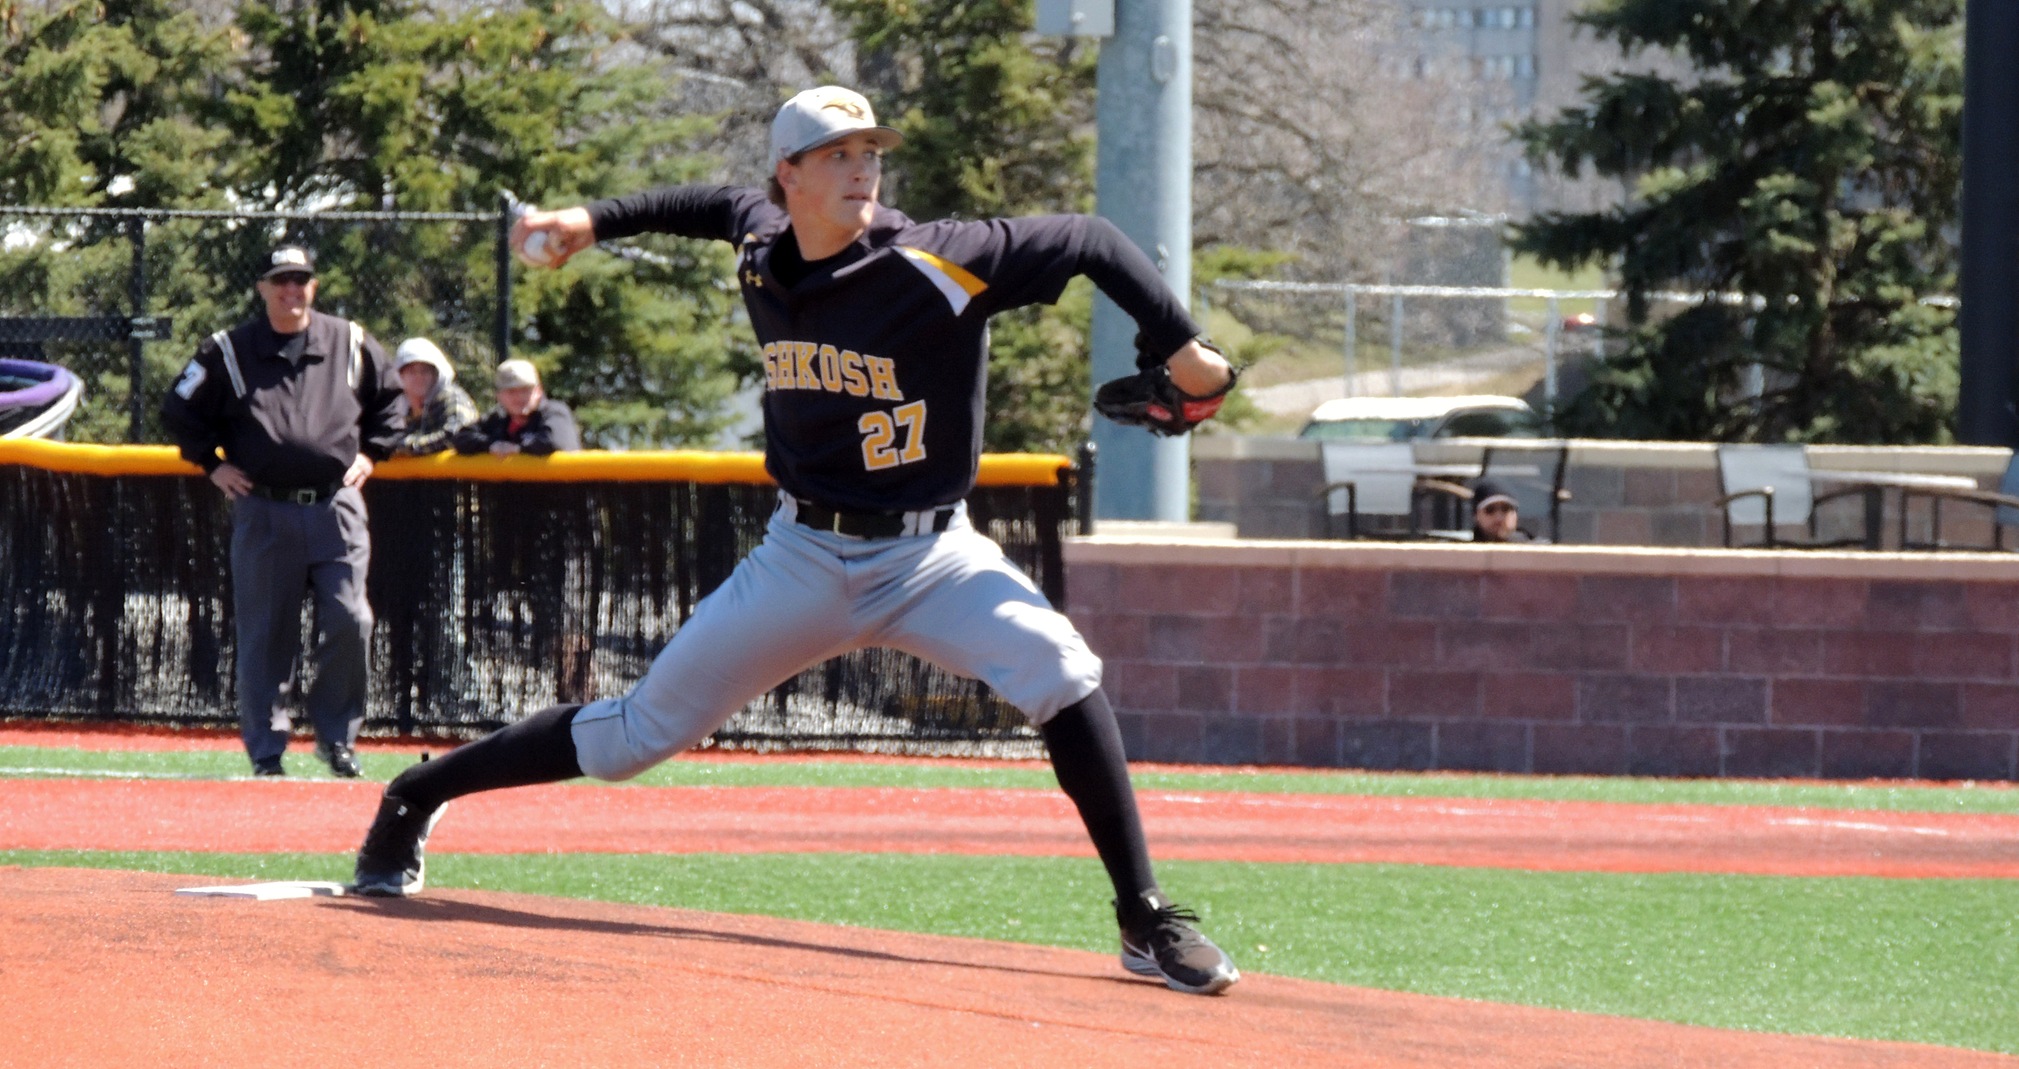 Colan Treml improved his record to 7-0 on the season by limiting UW-Whitewater to a double in the fourth inning and a pair of doubles in the eighth.